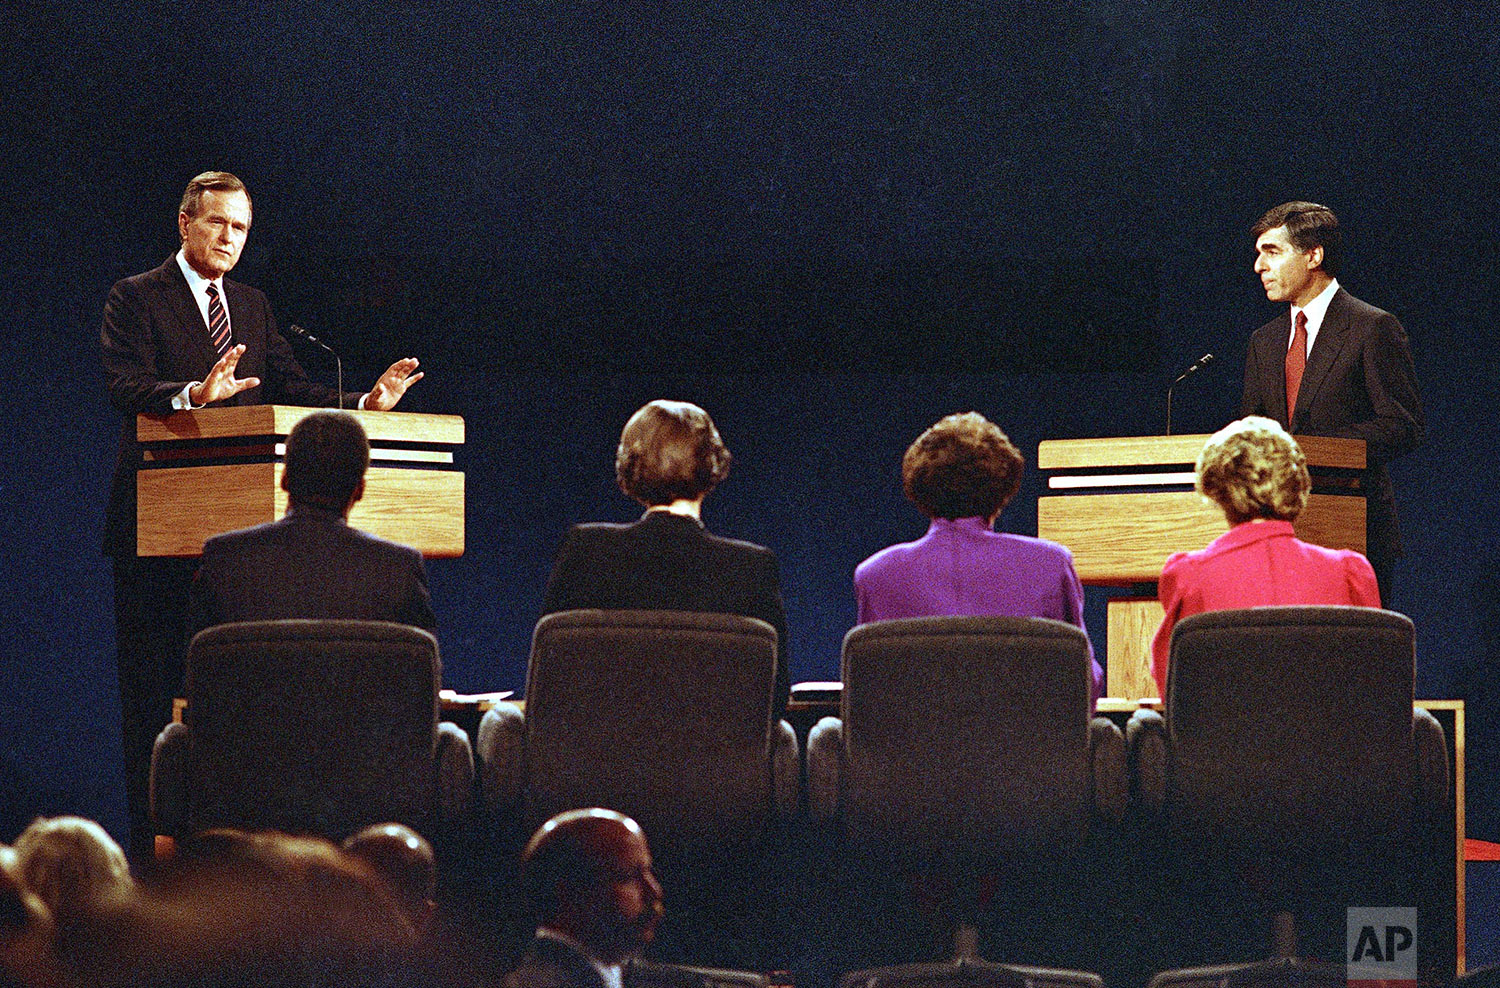  Vice President George Bush (left) gestures while making a point to the panel as Gov. Michael Dukakis watches at right during the second presidential debate on Thursday, Oct. 13, 1988 in Los Angeles. (AP Photo/Lennox McLendon) 